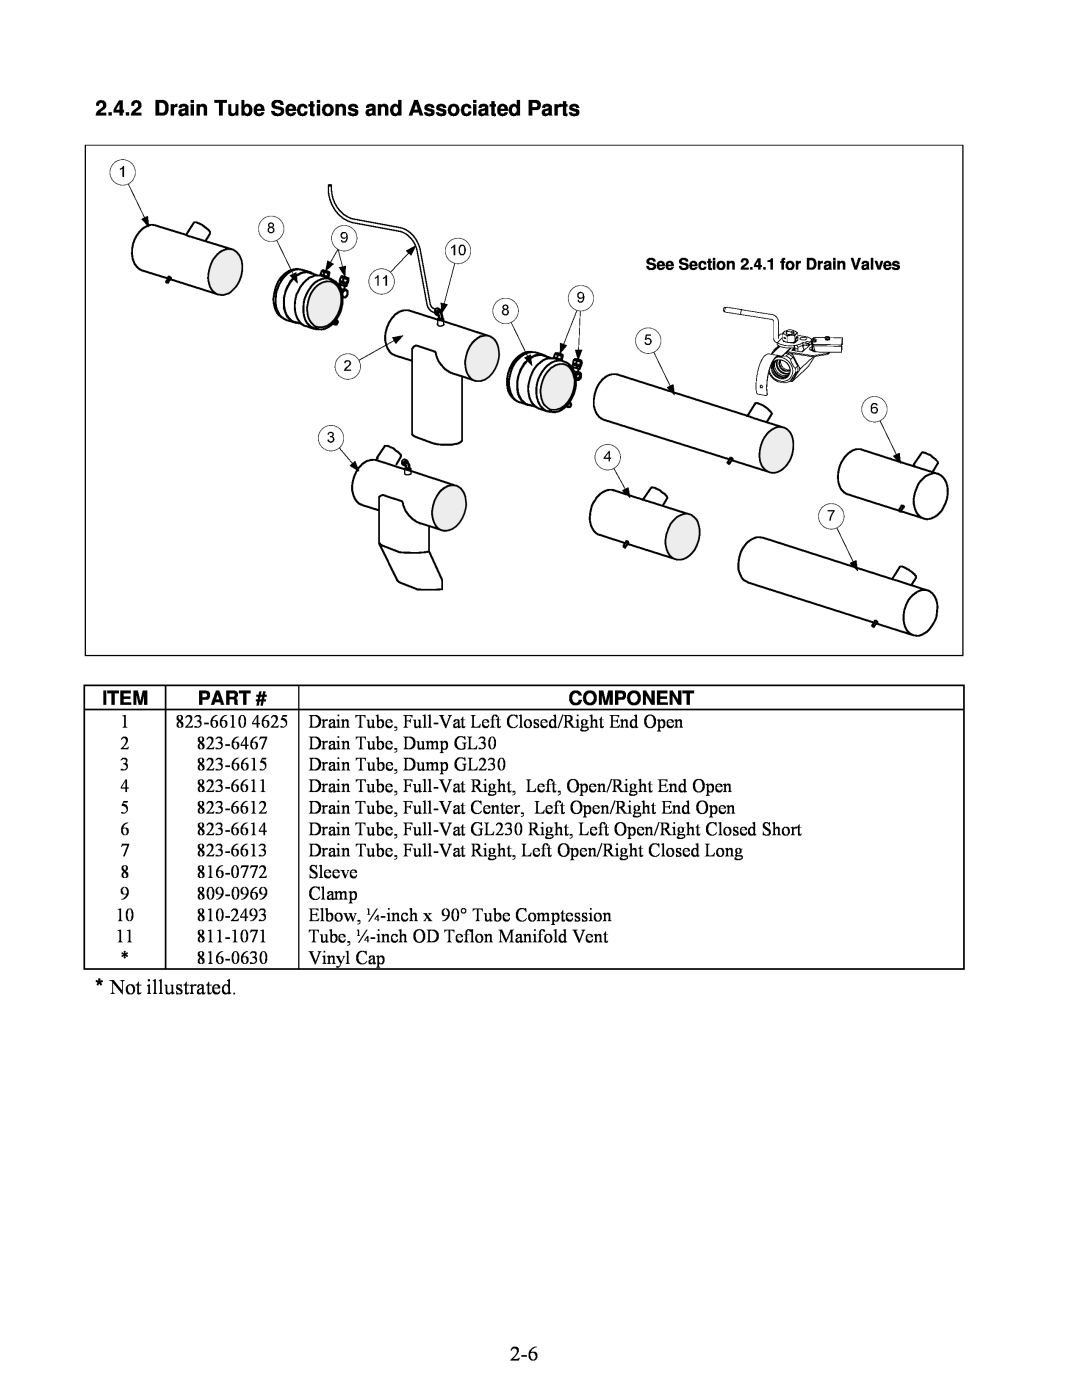 Frymaster 8196345 manual Drain Tube Sections and Associated Parts, Not illustrated 